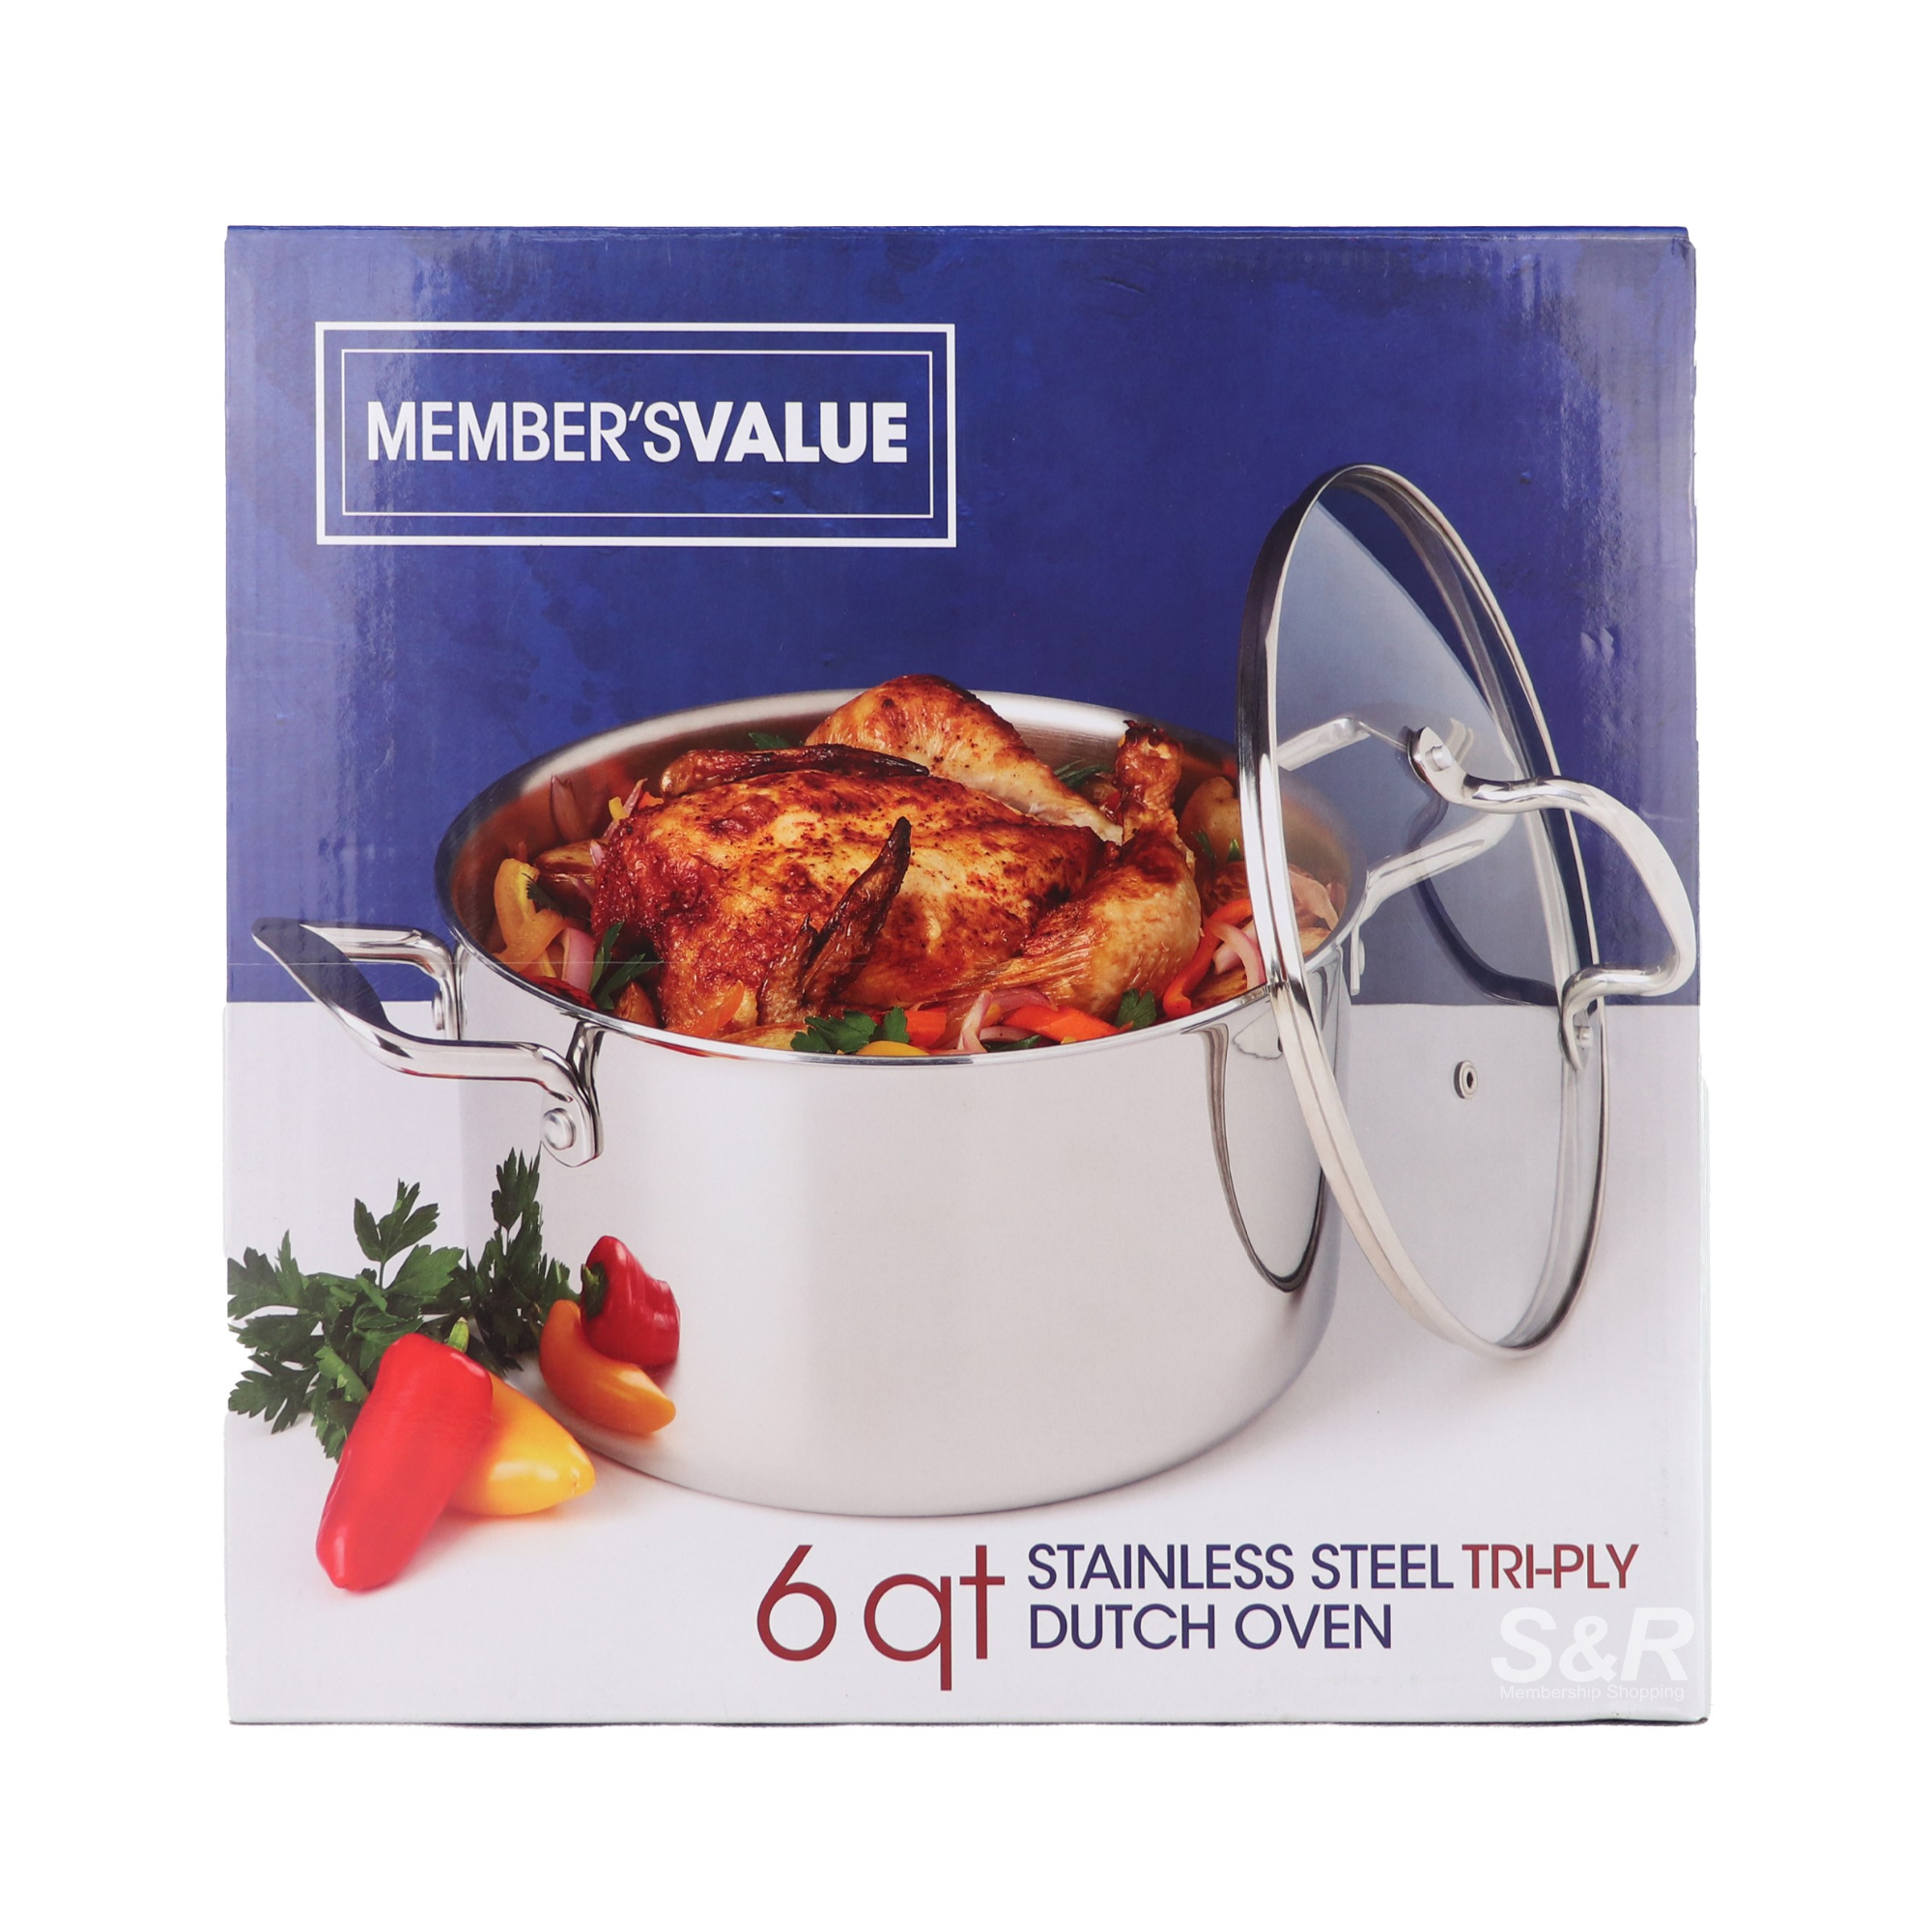 Member's Value 6Qt Stainless Steel Tri-Ply Dutch Oven 2pcs